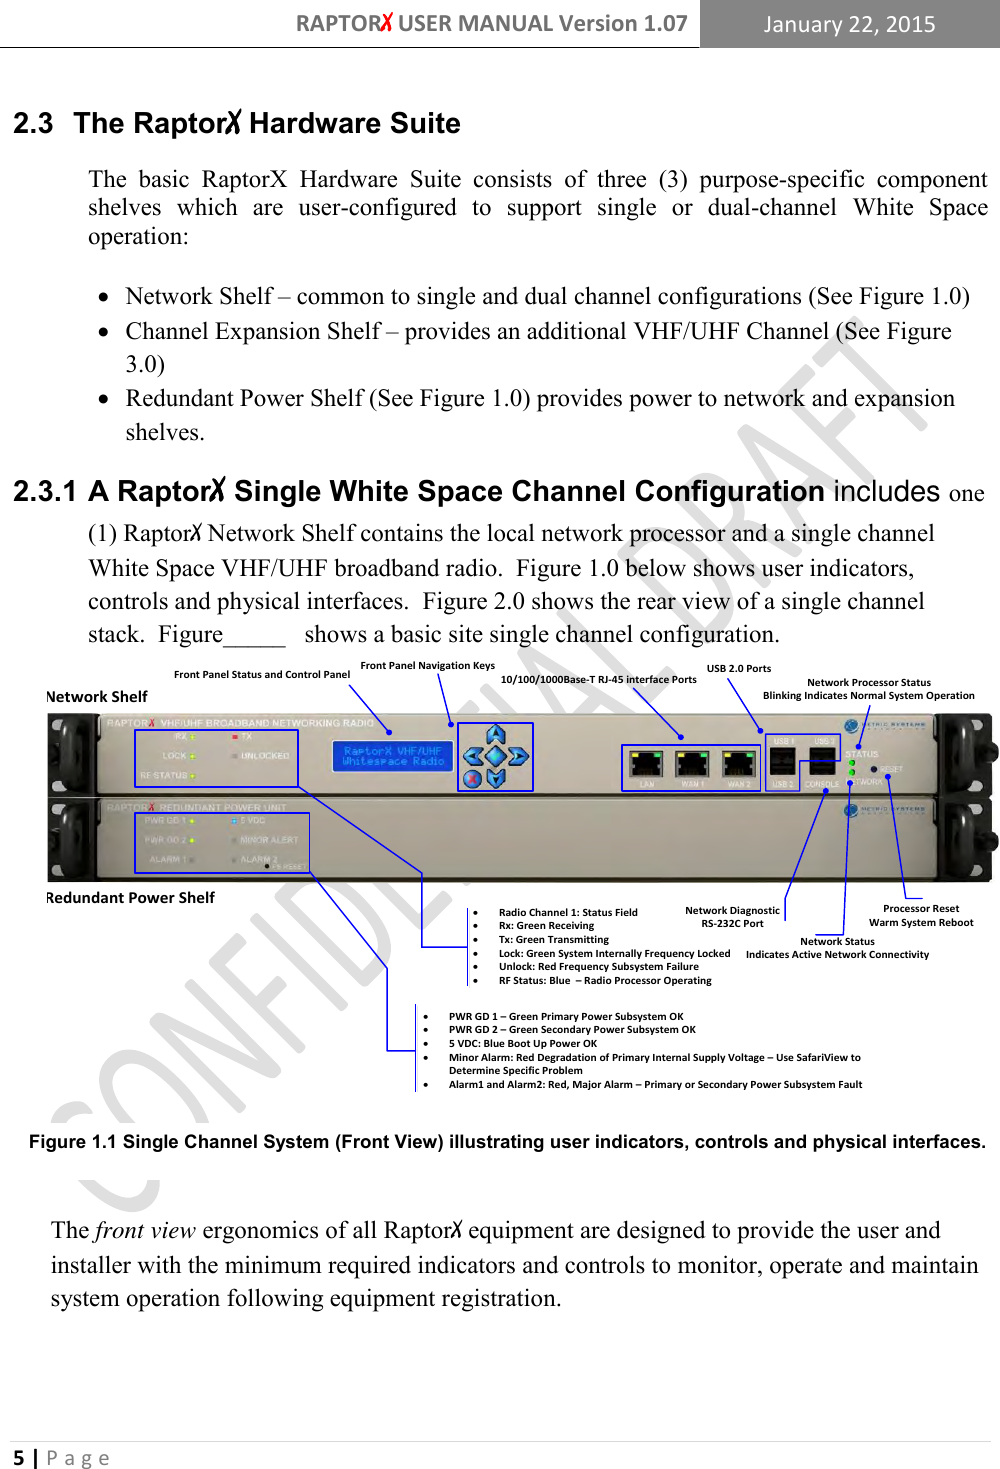 RAPTORX USER MANUAL Version 1.07 January 22, 2015  5 | P a g e   2.3  The RaptorX Hardware Suite The  basic  RaptorX  Hardware  Suite  consists  of  three  (3)  purpose-specific  component shelves  which  are  user-configured  to  support  single  or  dual-channel  White  Space operation:   Network Shelf – common to single and dual channel configurations (See Figure 1.0)  Channel Expansion Shelf – provides an additional VHF/UHF Channel (See Figure 3.0)  Redundant Power Shelf (See Figure 1.0) provides power to network and expansion shelves.  A RaptorX Single White Space Channel Configuration includes one 2.3.1(1) RaptorX Network Shelf contains the local network processor and a single channel White Space VHF/UHF broadband radio.  Figure 1.0 below shows user indicators, controls and physical interfaces.  Figure 2.0 shows the rear view of a single channel stack.  Figure_____   shows a basic site single channel configuration.   The front view ergonomics of all RaptorX equipment are designed to provide the user and installer with the minimum required indicators and controls to monitor, operate and maintain system operation following equipment registration.   Figure 1.1 Single Channel System (Front View) illustrating user indicators, controls and physical interfaces. Network Processor StatusBlinking Indicates Normal System OperationProcessor ResetWarm System Reboot   Network Status Indicates Active Network Connectivity  Radio Channel 1: Status Field Rx: Green Receiving Tx: Green Transmitting Lock: Green System Internally Frequency Locked Unlock: Red Frequency Subsystem Failure  RF Status: Blue  – Radio Processor Operating     PWR GD 1 – Green Primary Power Subsystem OK PWR GD 2 – Green Secondary Power Subsystem OK 5 VDC: Blue Boot Up Power OK Minor Alarm: Red Degradation of Primary Internal Supply Voltage – Use SafariView to Determine Specific Problem Alarm1 and Alarm2: Red, Major Alarm – Primary or Secondary Power Subsystem Fault  Front Panel Navigation KeysFront Panel Status and Control PanelNetwork DiagnosticRS-232C Port USB 2.0 Ports10/100/1000Base-T RJ-45 interface PortsRedundant Power ShelfNetwork Shelf